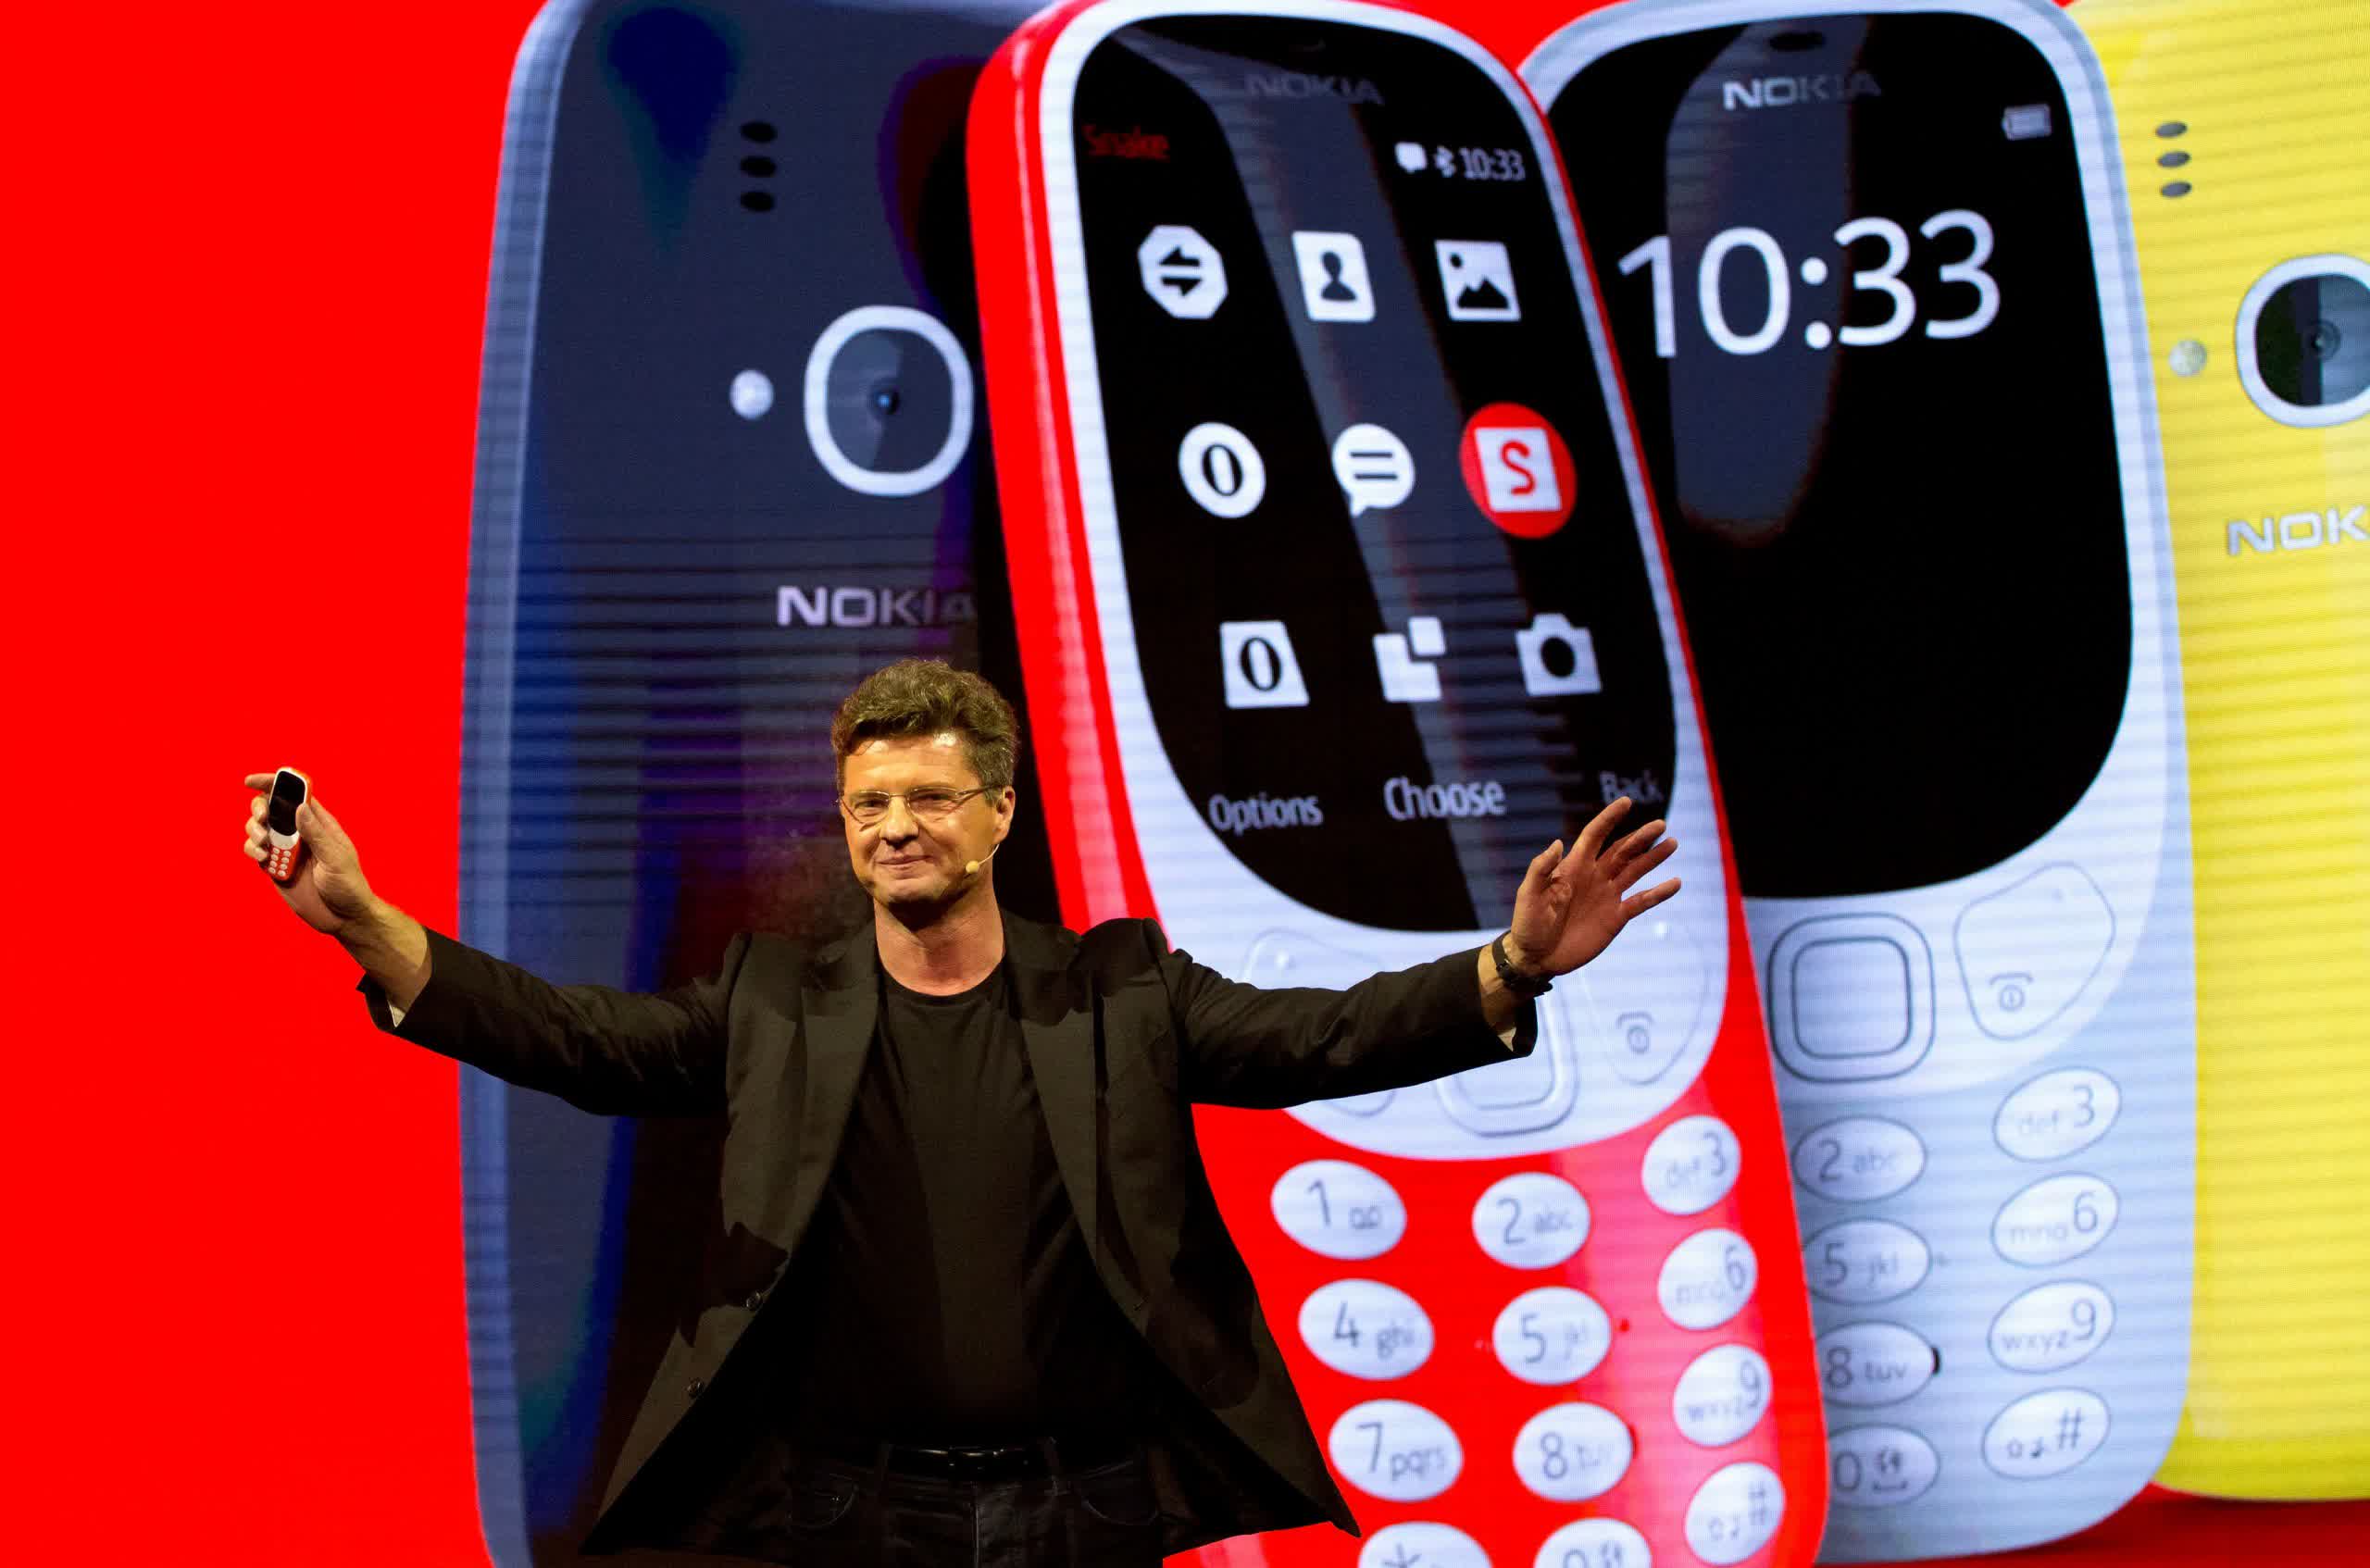 Nokia: The Story of the Once-Legendary Phone Maker - best tech news sites - Technology - UK Prime News